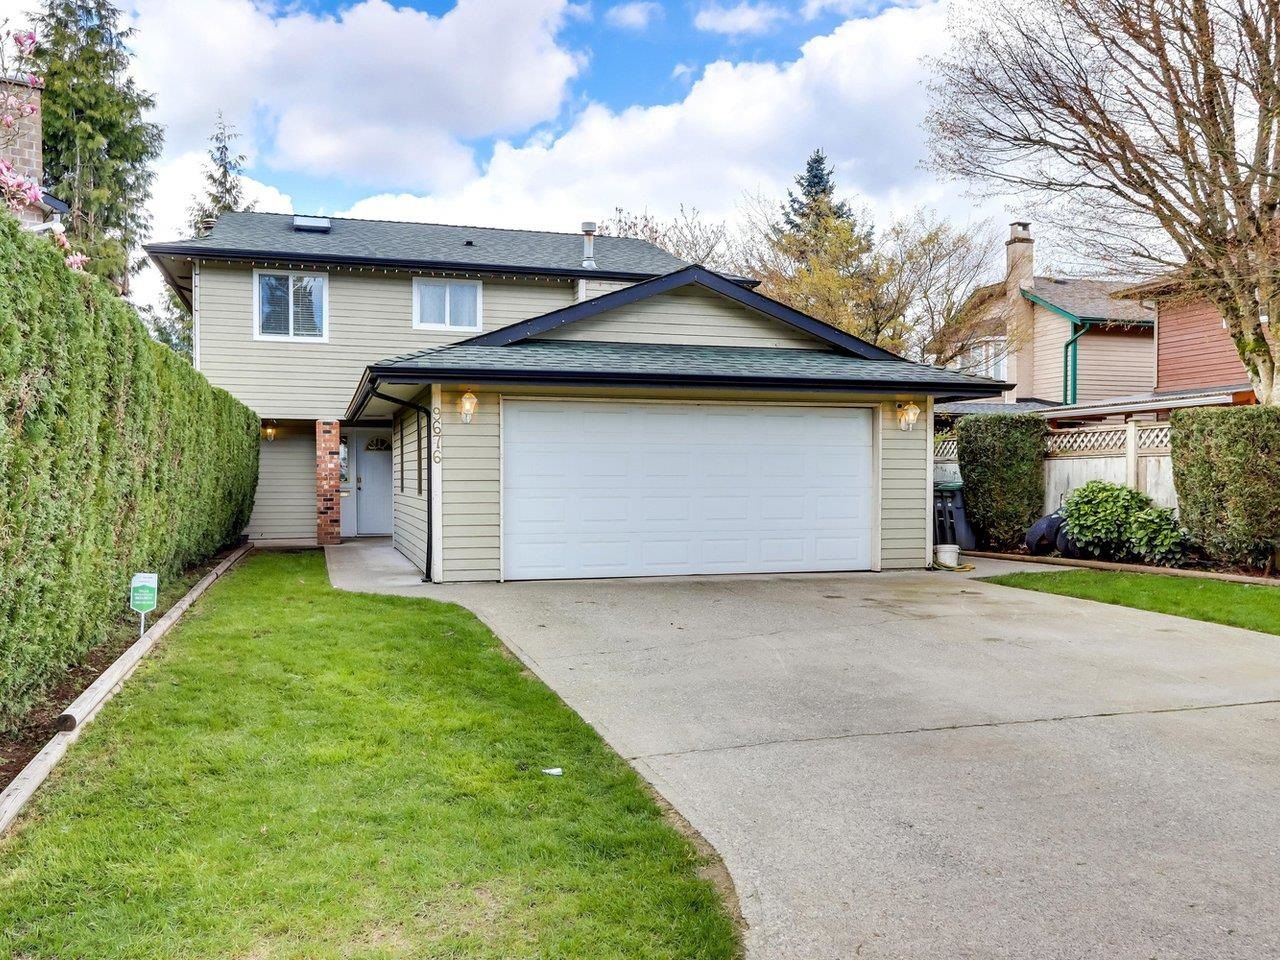 I have sold a property at 9676 155B ST in Surrey
